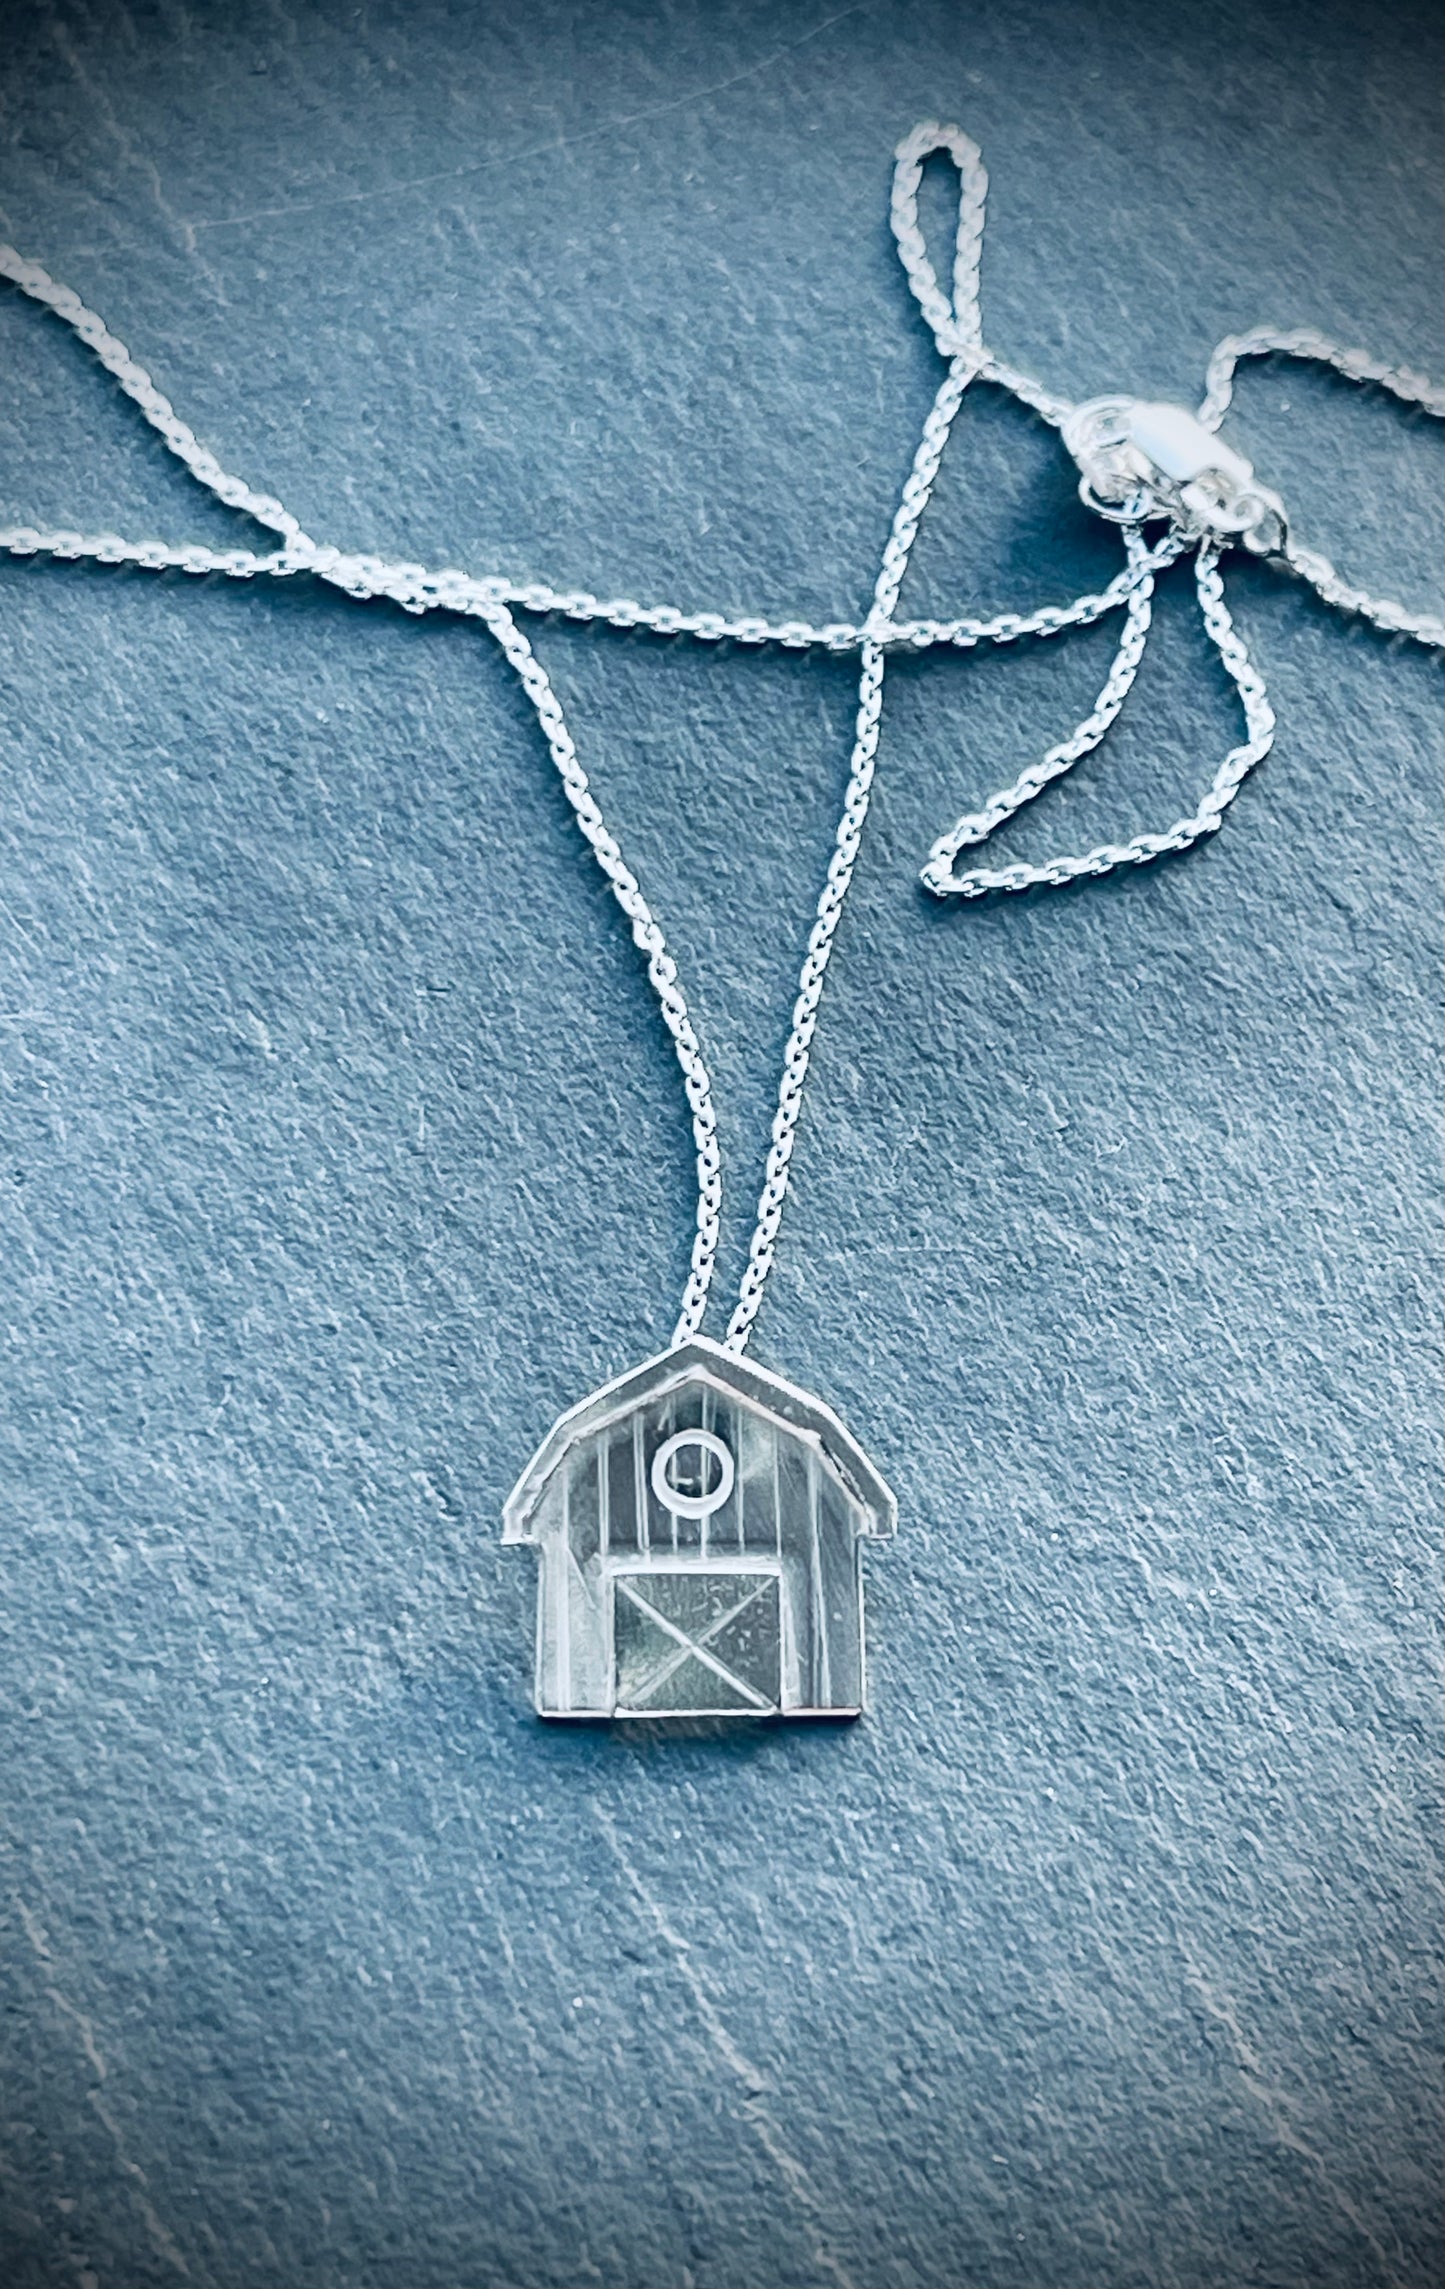 Barn Necklace